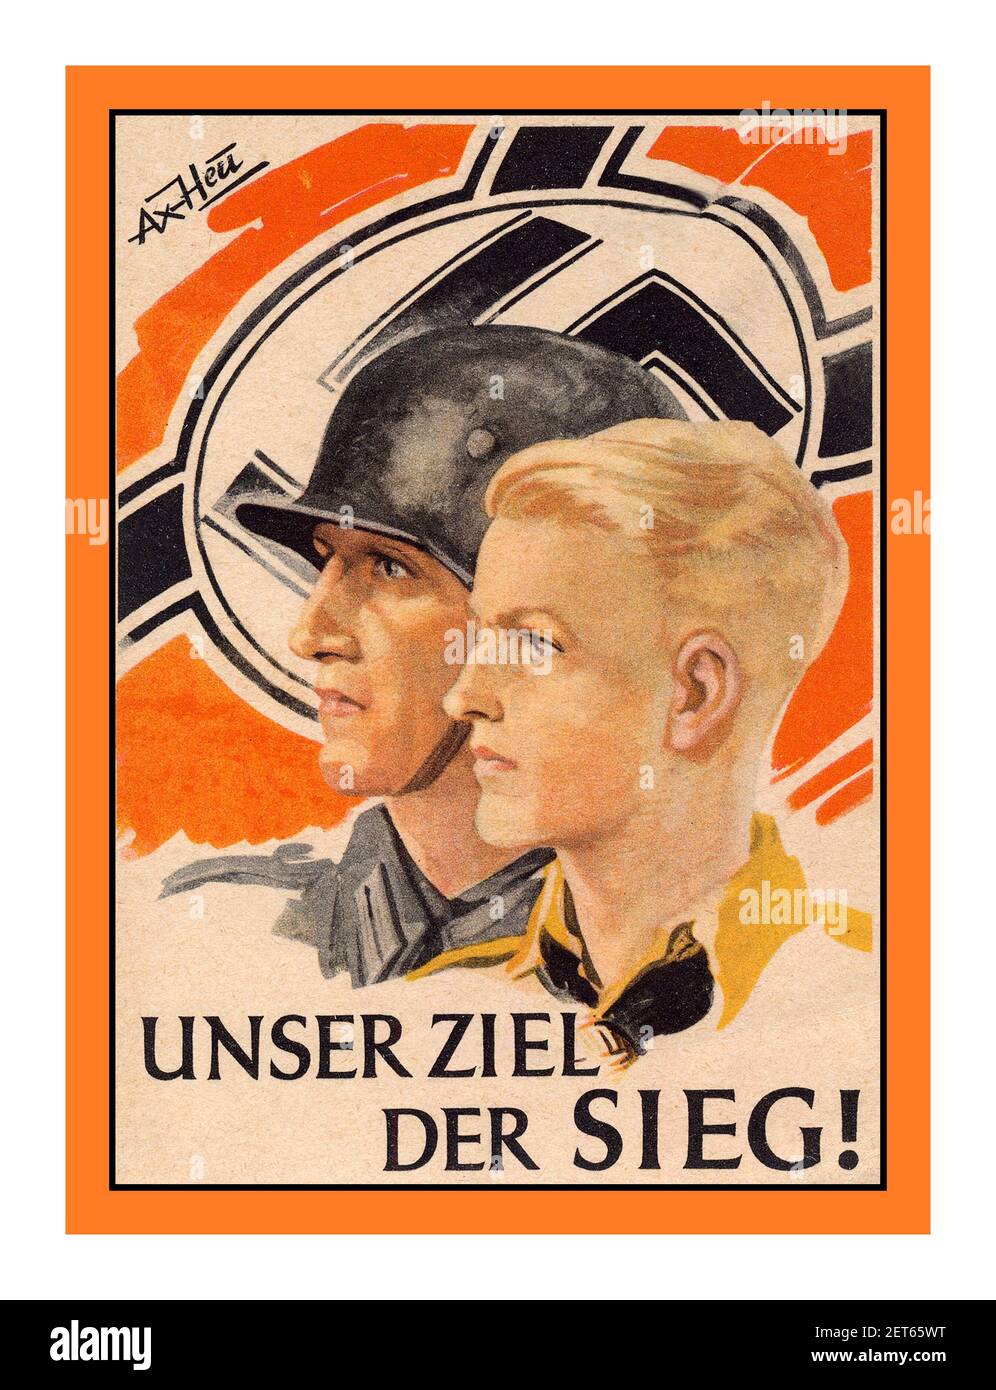 Vintage WW2 Nazi Propaganda 1938 poster card 'OUR GOAL THE VICTORY'  Hitler Youth in front of Nazi Germany Wehrmacht Soldier  1938 color card 'OUR ZIEL DER SIEG'  'Hitler Youth in front of man with steel helmet and swastika flag' Stock Photo